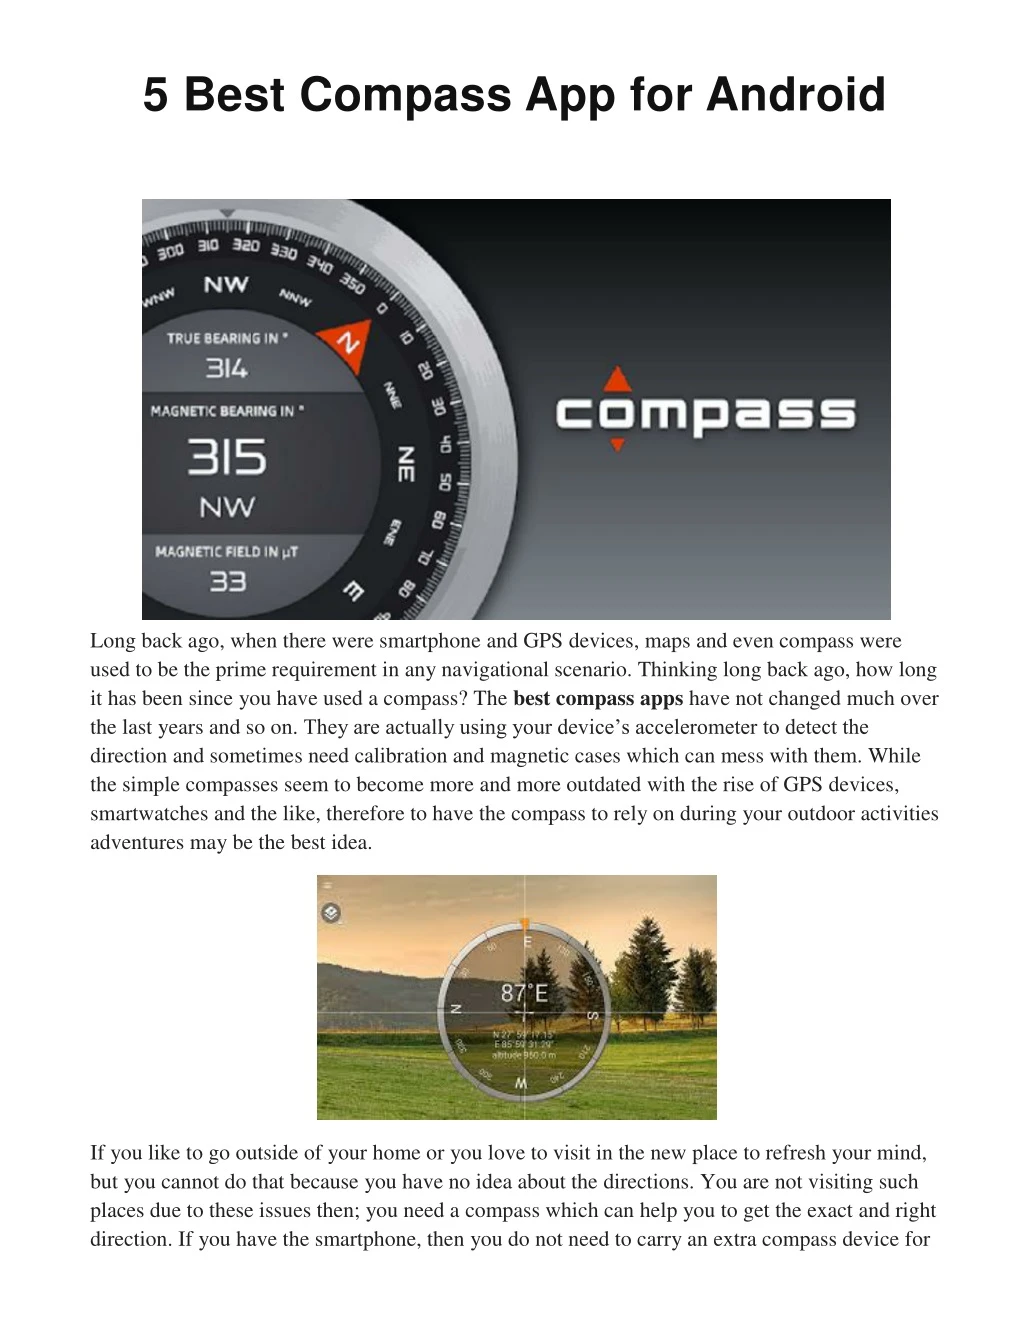 5 best compass app for android